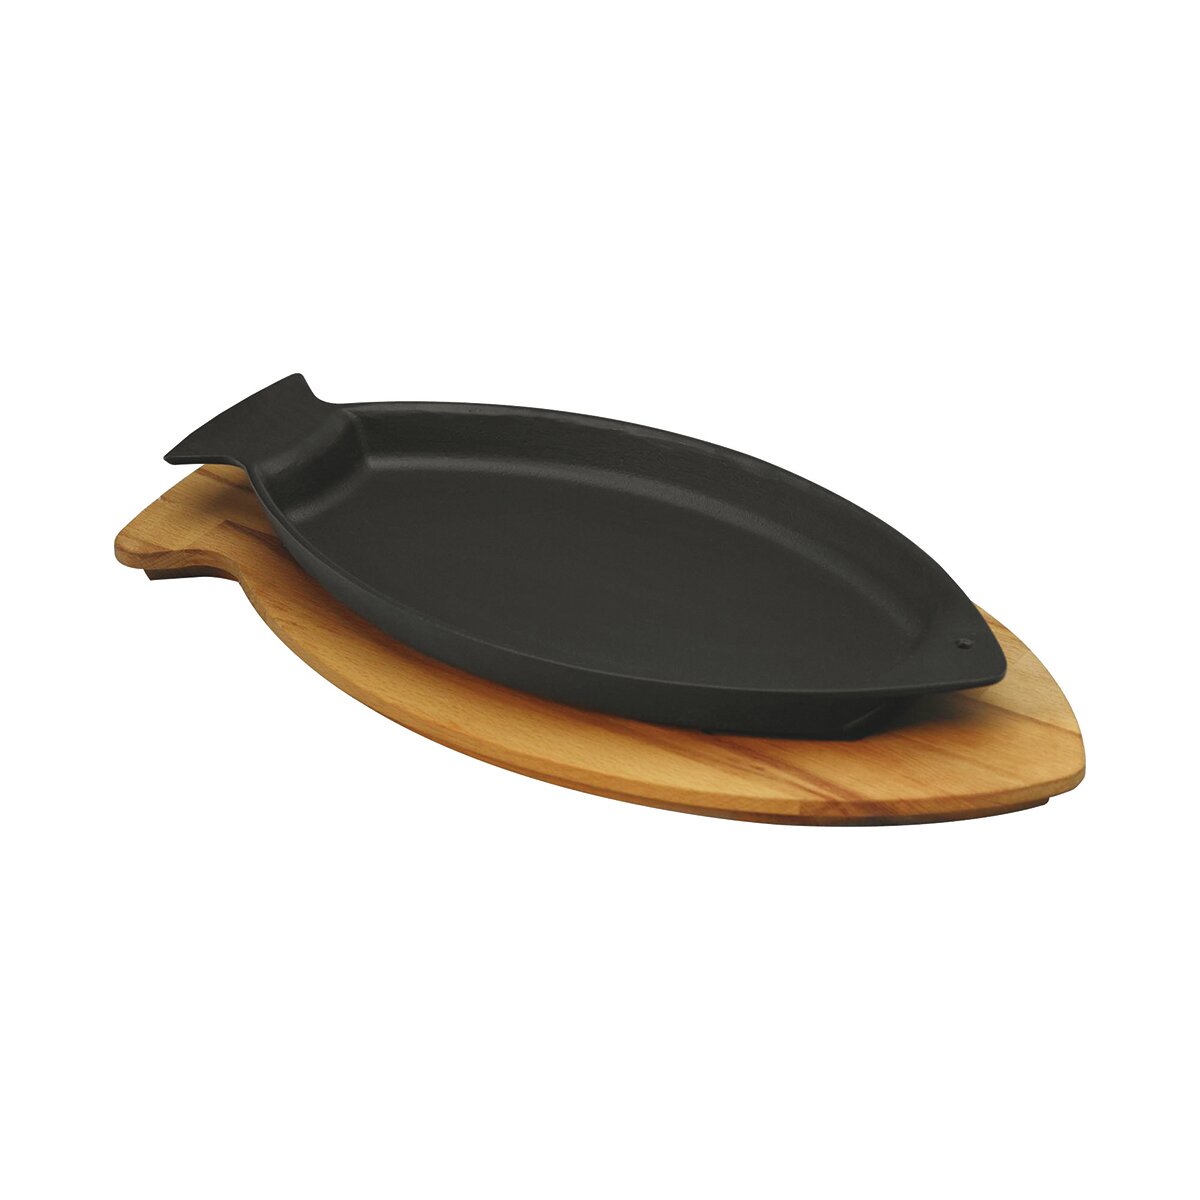 Basic Essentials 2-Piece Cast Iron Oval Sizzler Set with Wooden Trivet